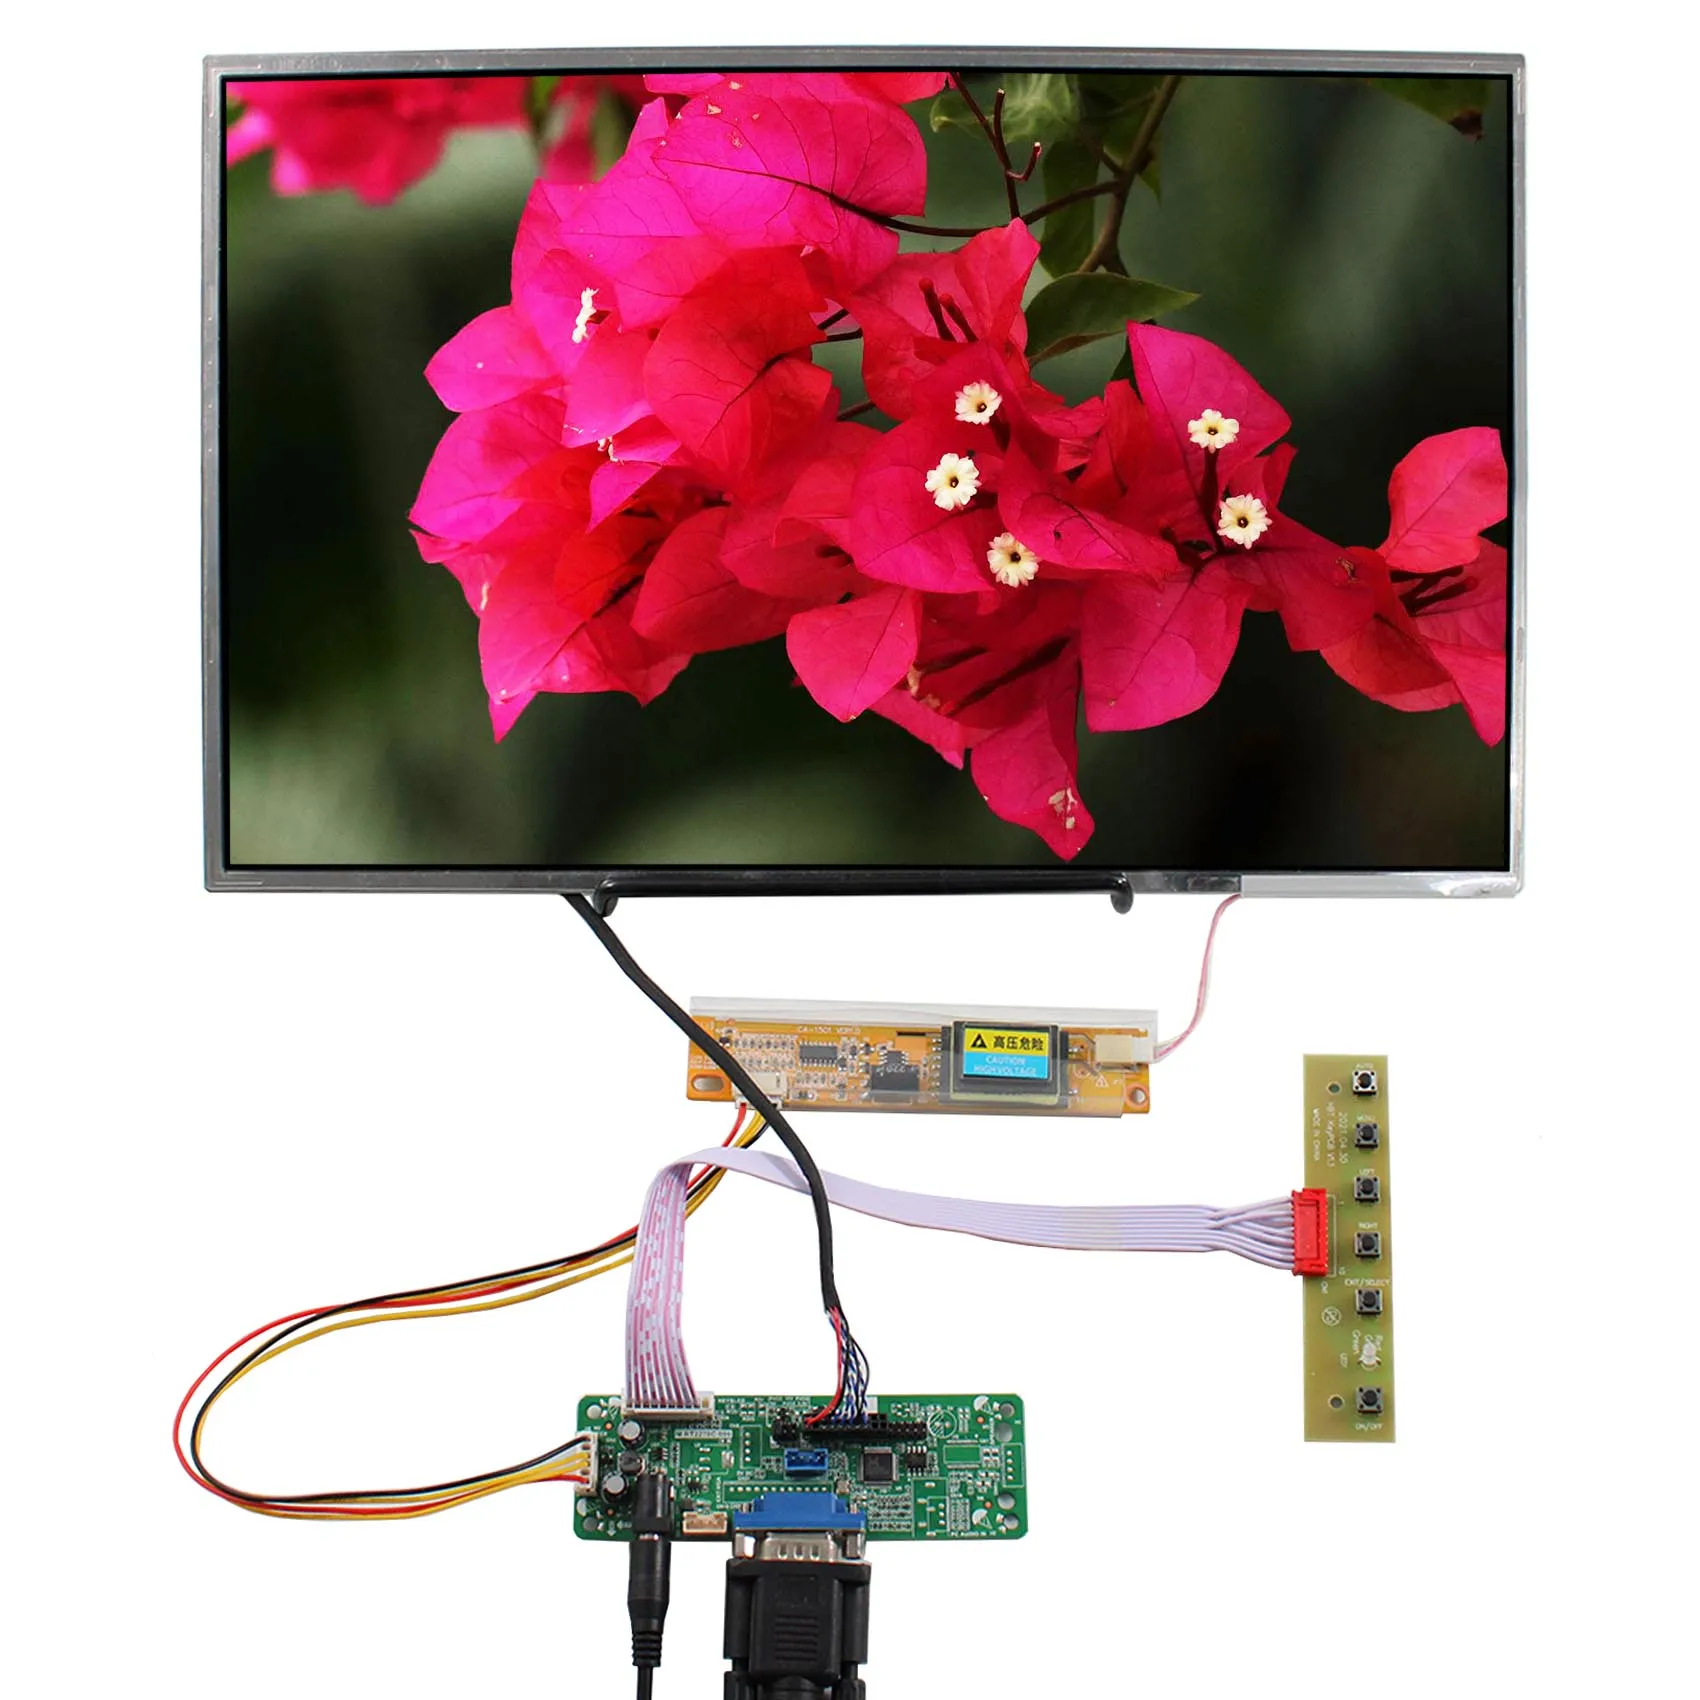 

15.4inch 1280x800 TFT-LCD Screen For Laptop Display ,DIY Monitor, with VGA LCD Controller Board